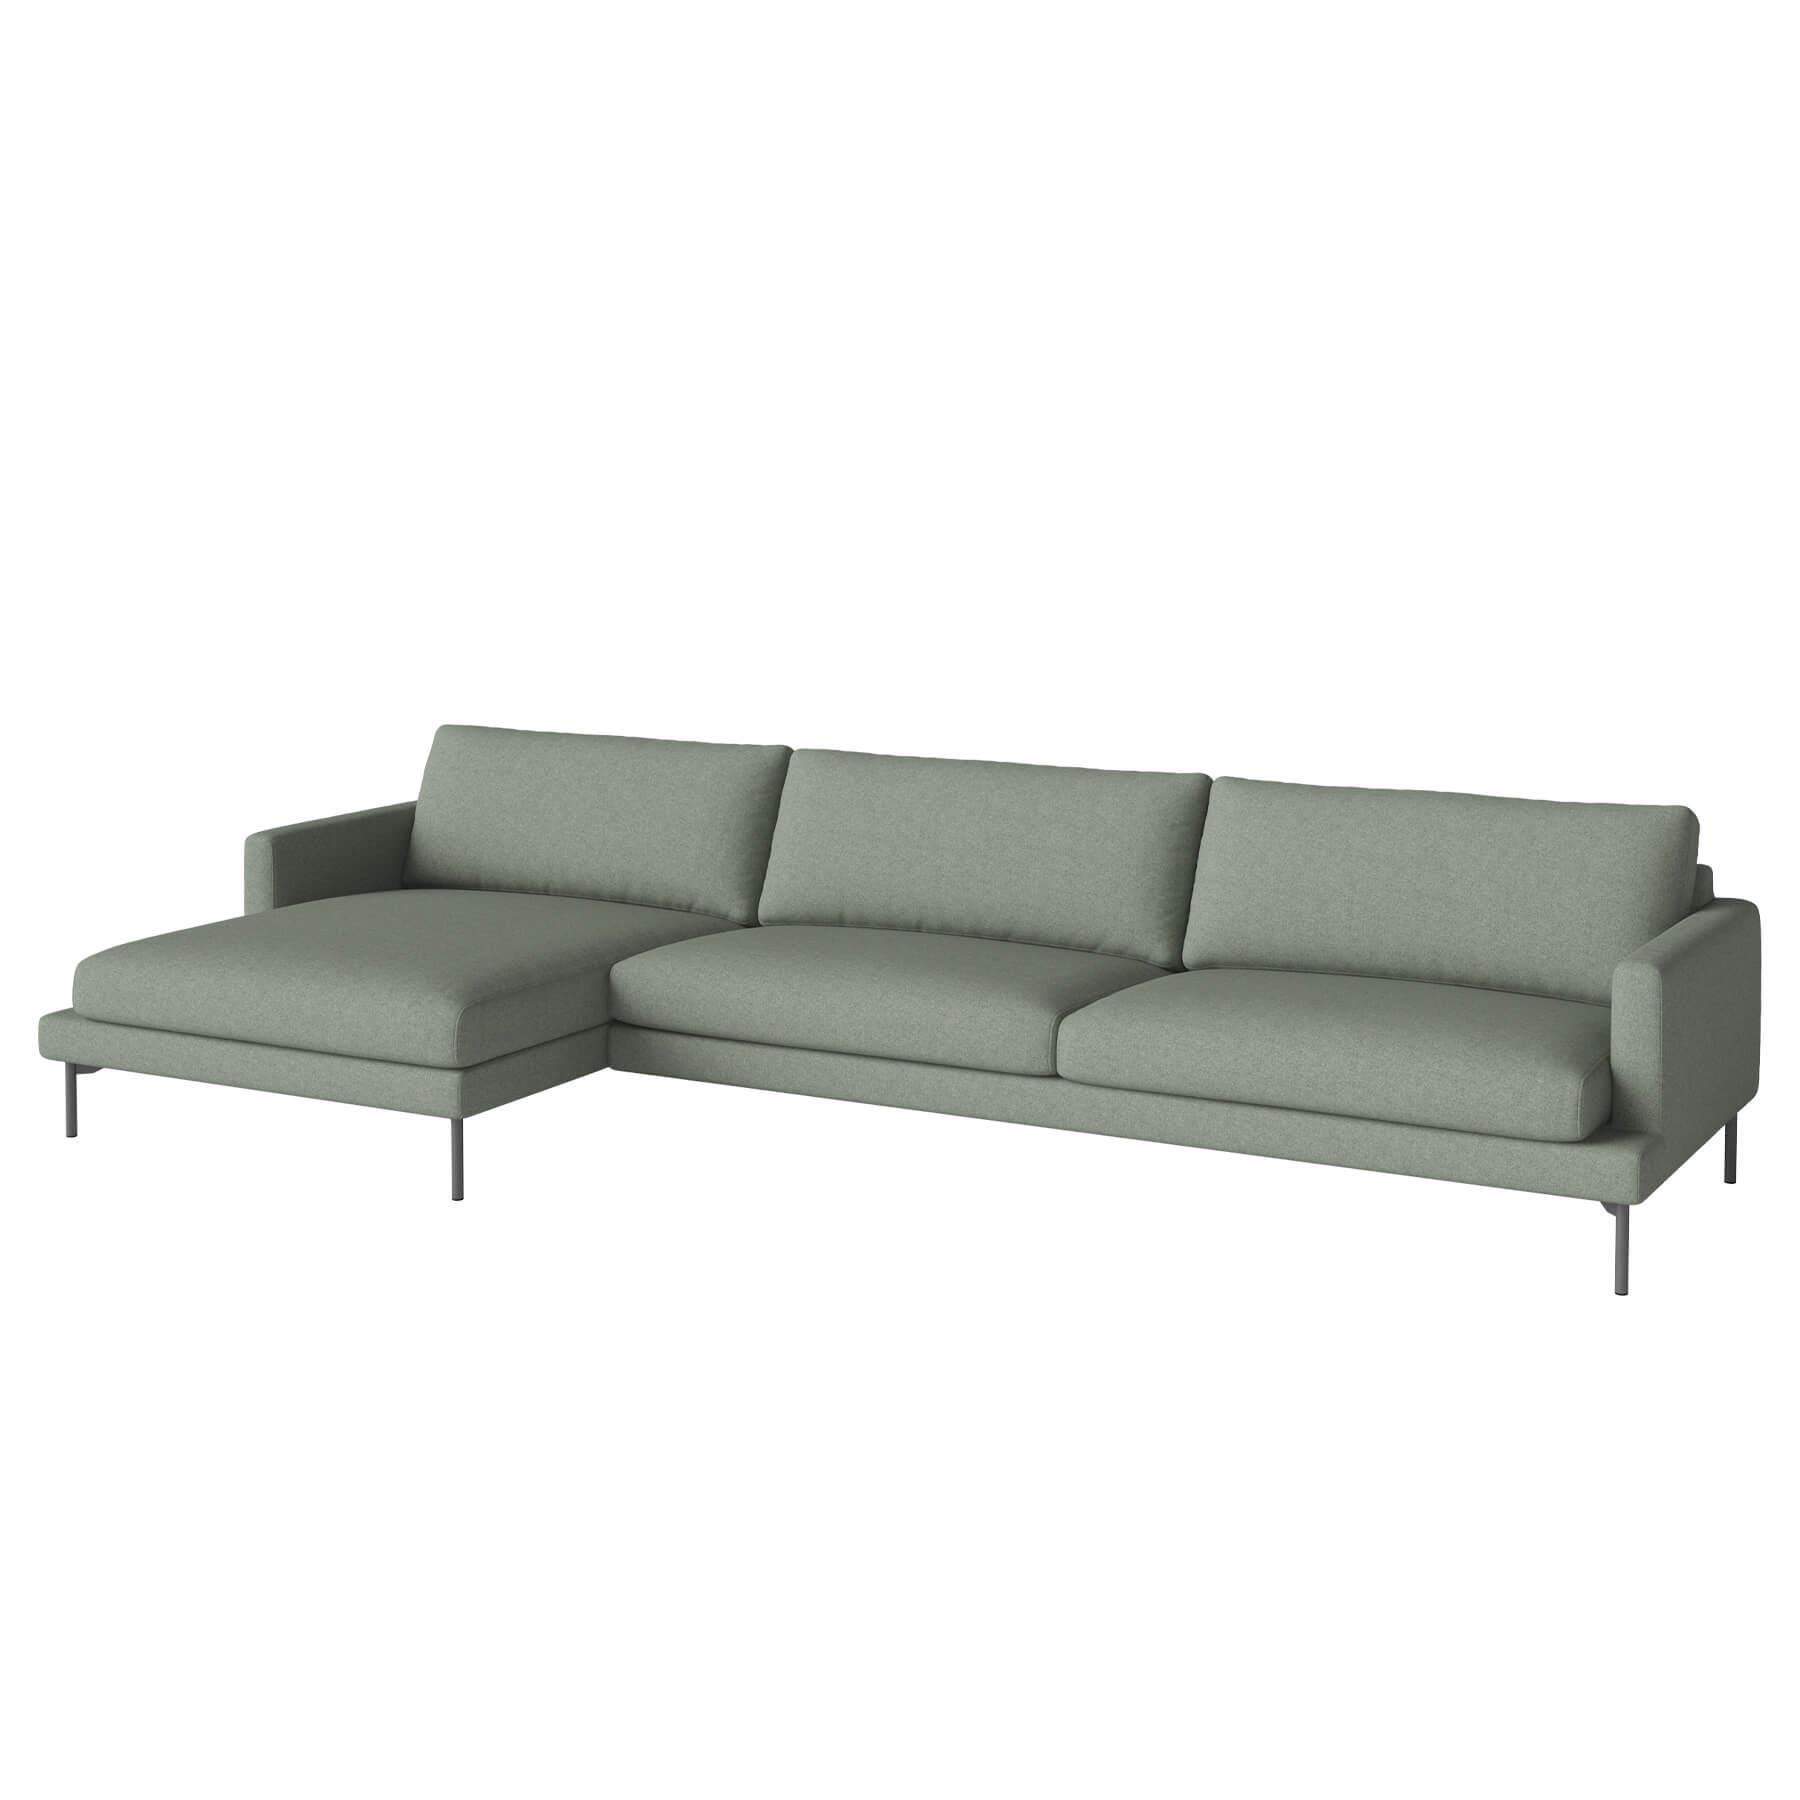 Bolia Veneda Sofa 45 Seater Sofa With Chaise Longue Grey Laquered Steel Qual Green Left Green Designer Furniture From Holloways Of Ludlow